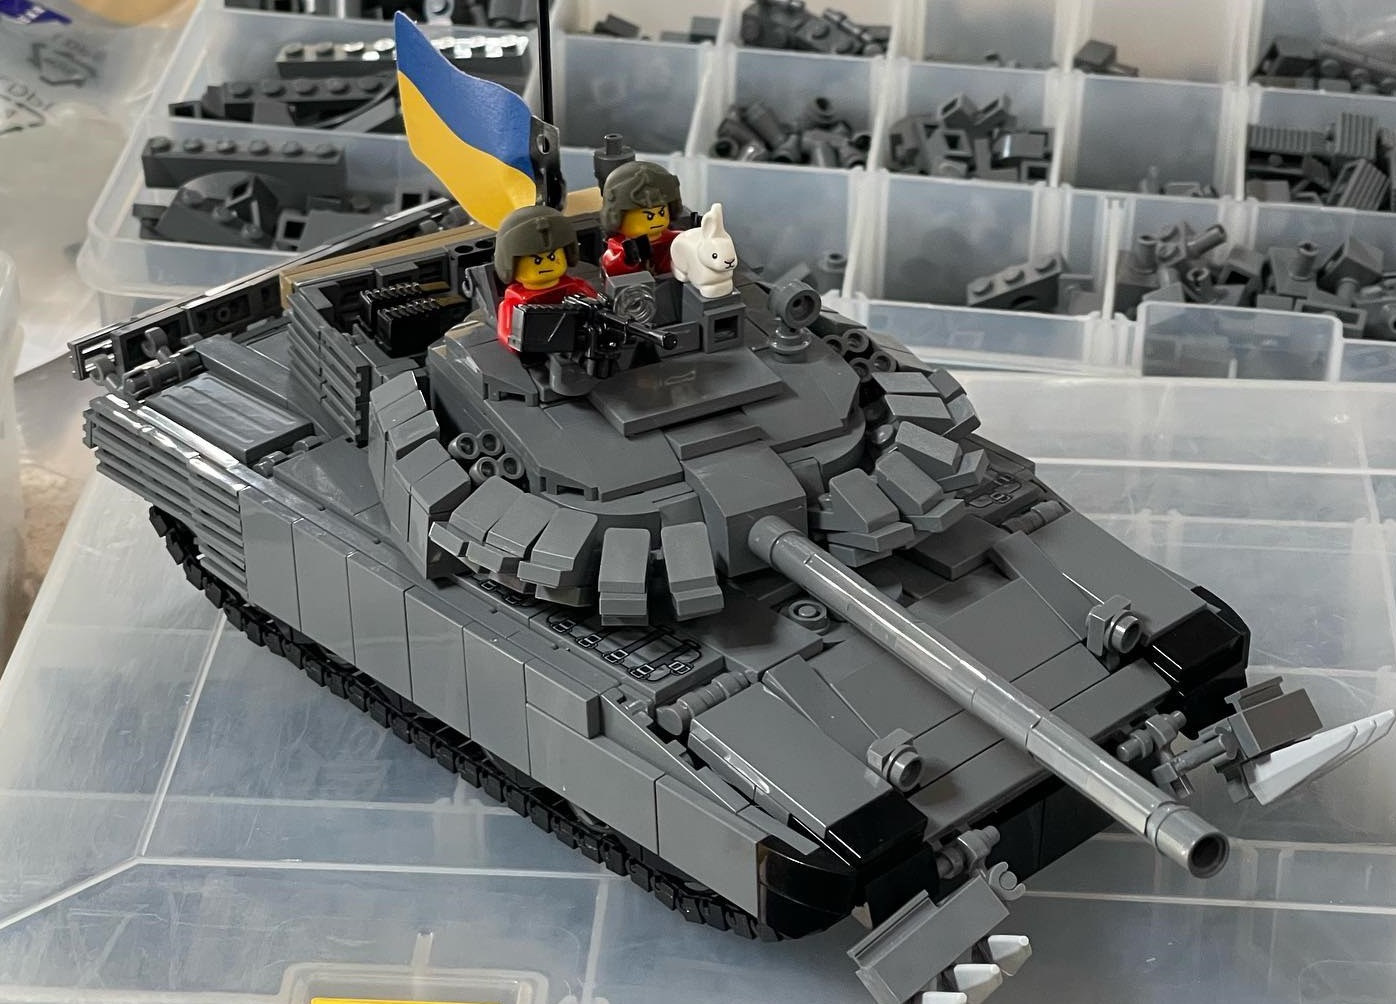 Lego tanks raised $220K to support Ukrainian heroes on the frontlines